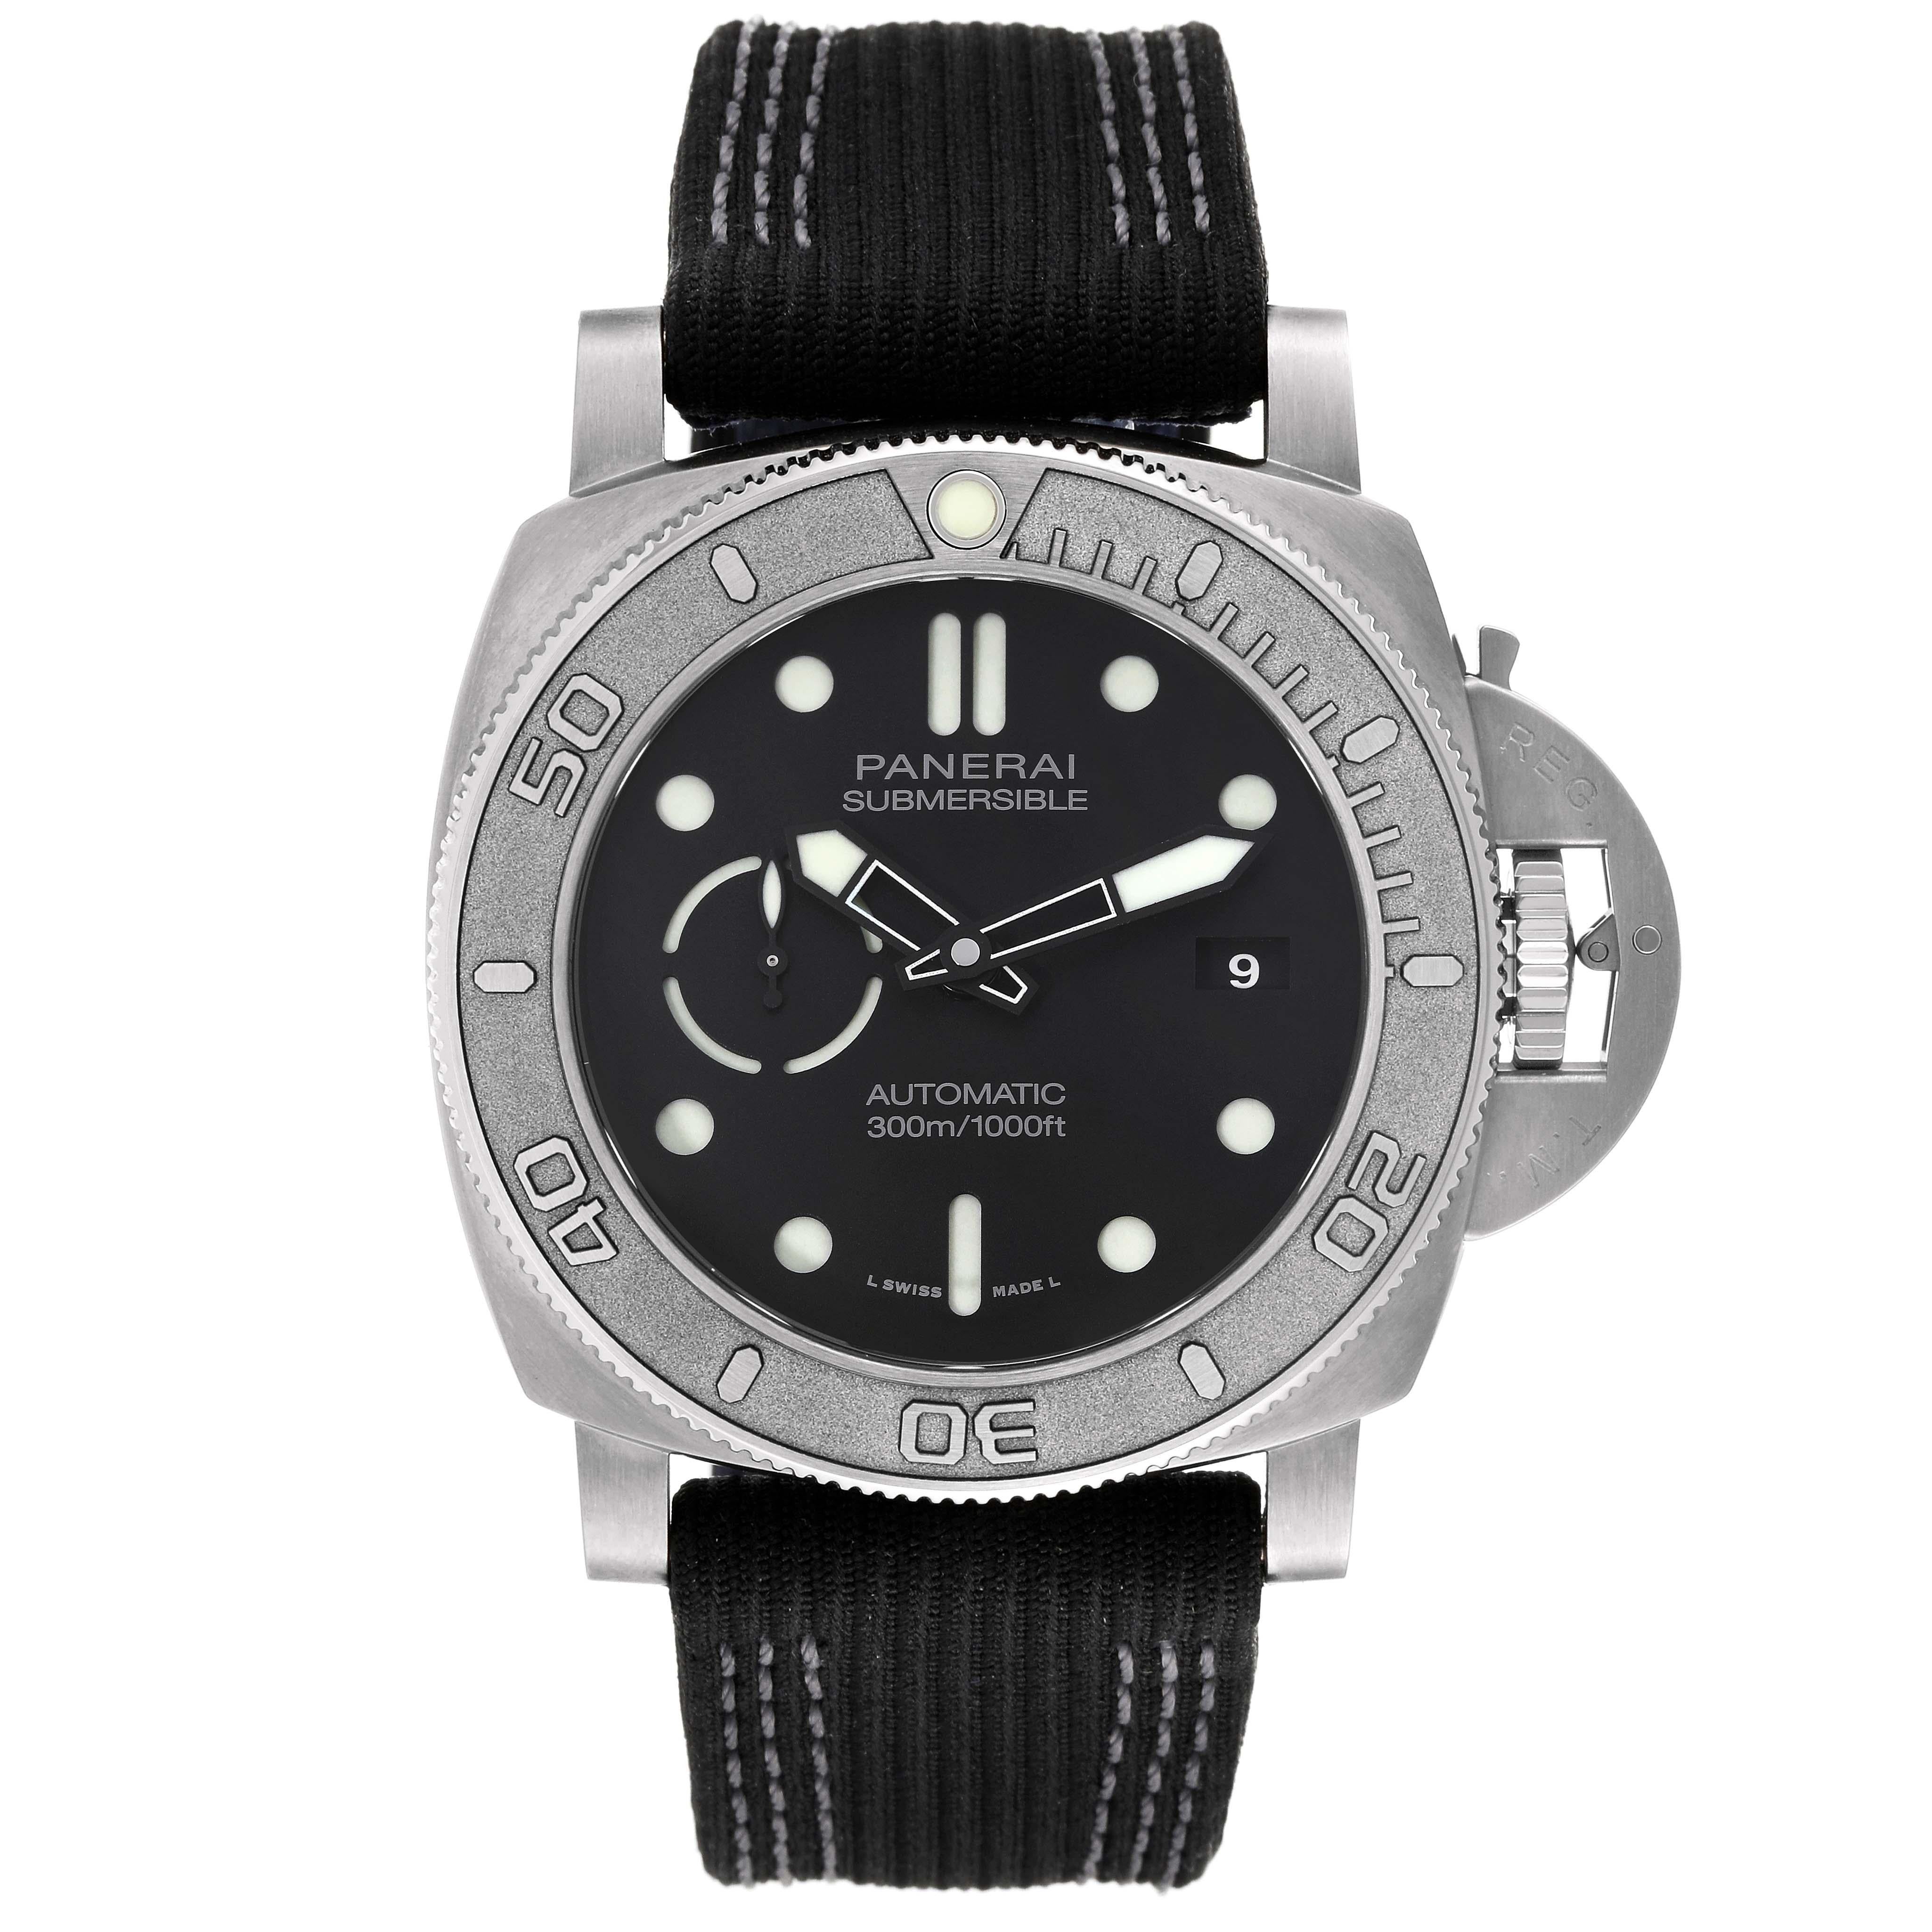 Panerai Submersible Mike Horn Edition Titanium Mens Watch PAM00984 Box Card. Automatic self-winding movement. Cushion shaped titanium case 47.0 mm in diameter. Panerai patented crown protector. Unidirectional rotating titanium bezel with graduated